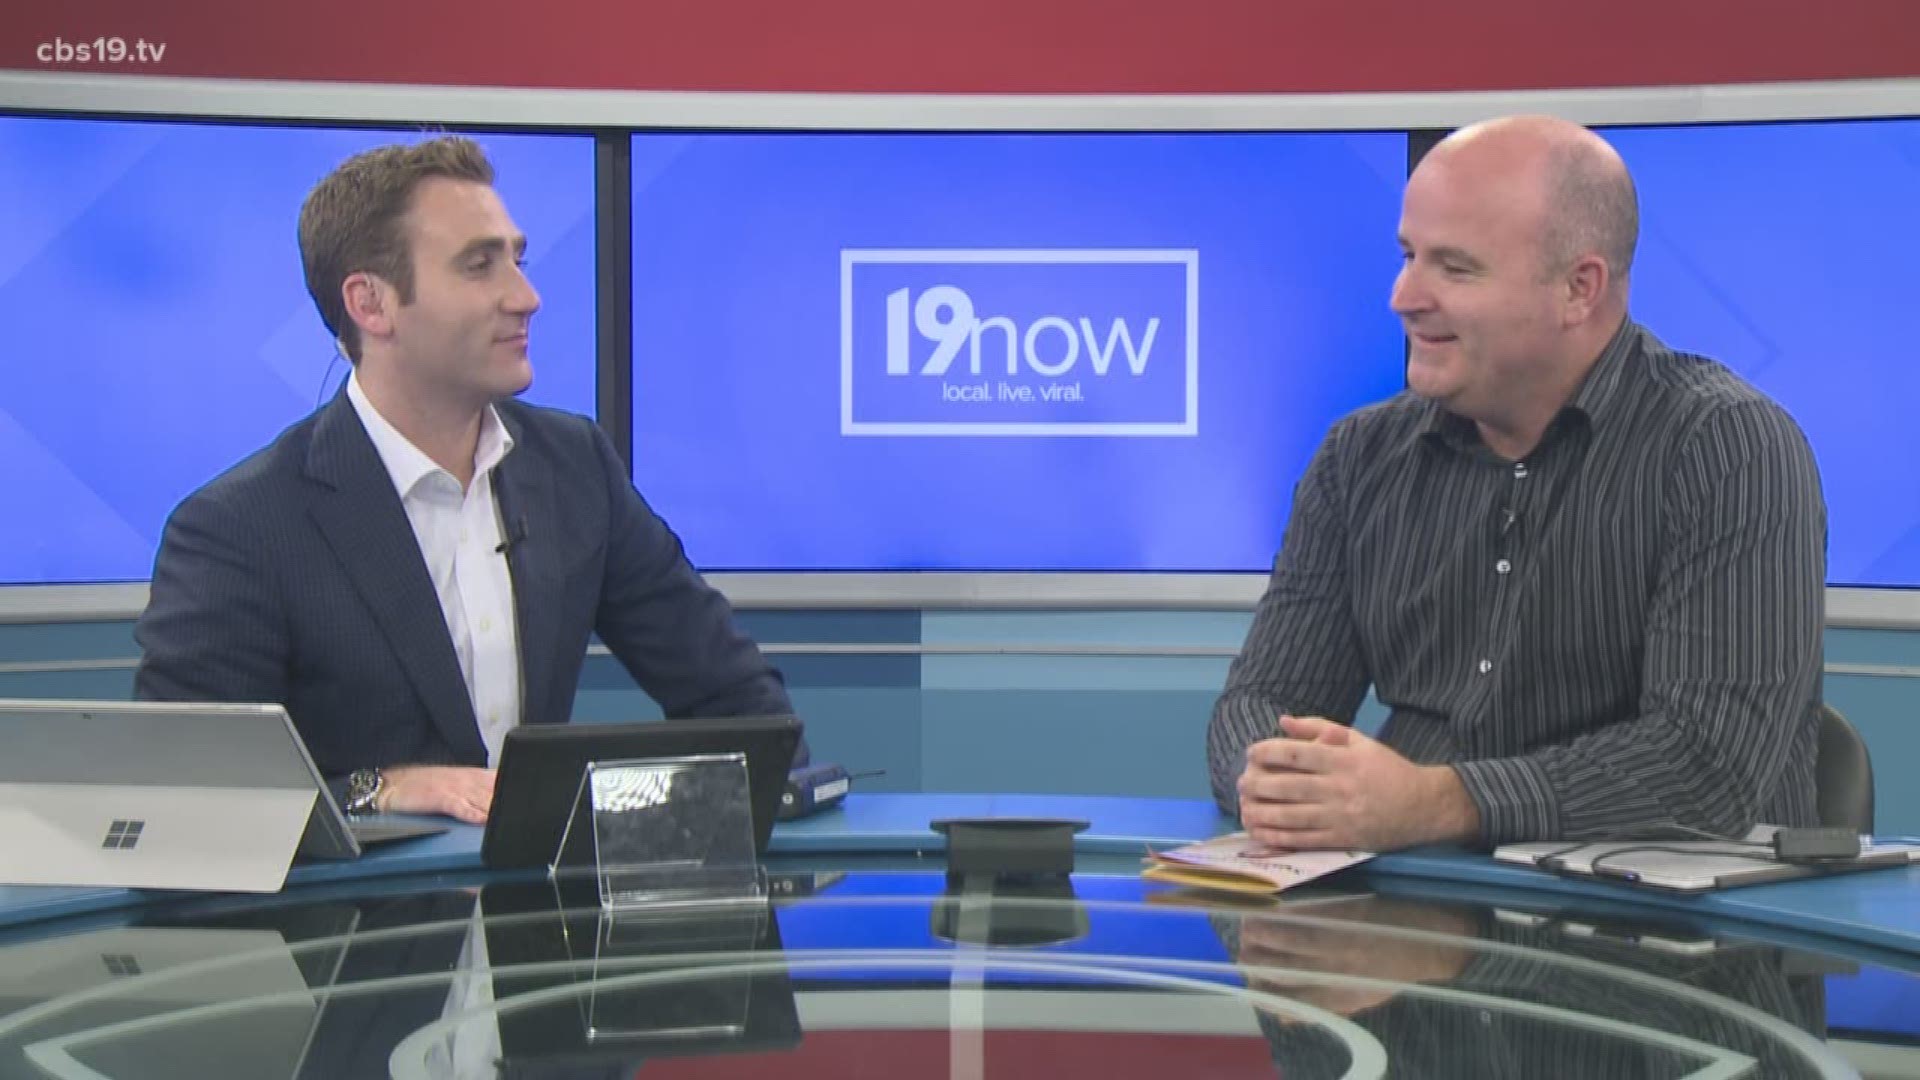 Heath Stoner, Director of TJC's Health & Physical Education Center, joins 19now to discuss the wide variety of summer camps.